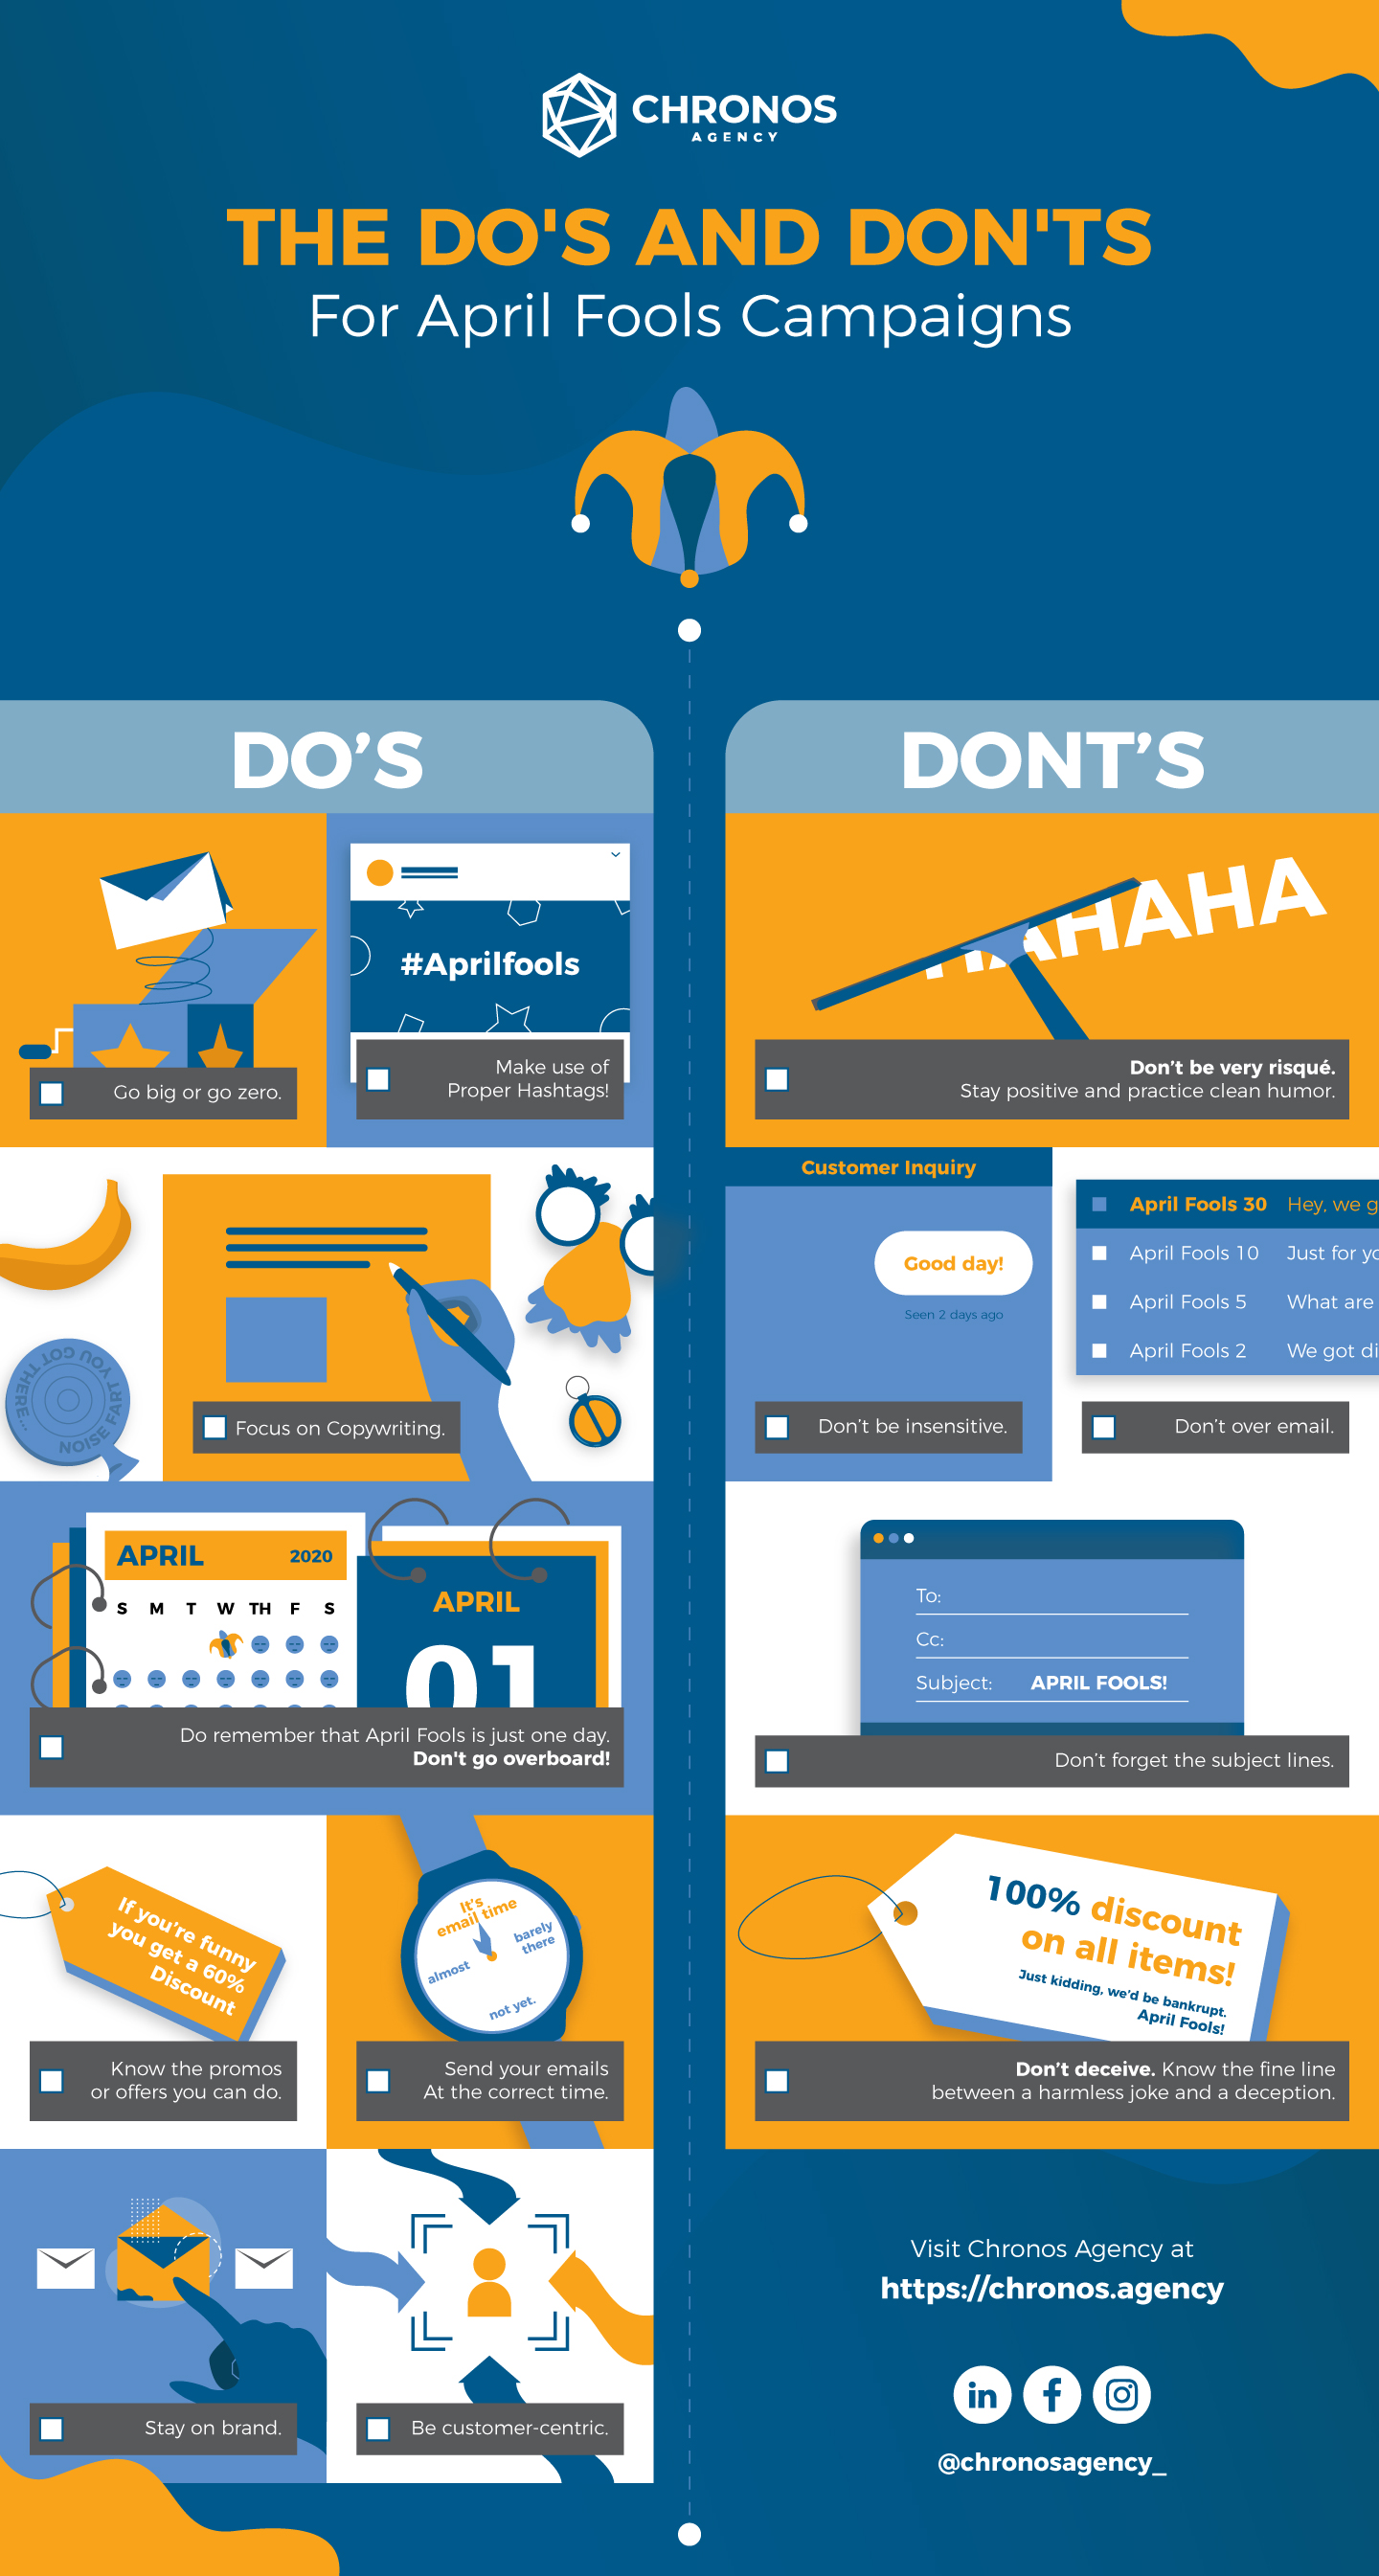 [INFOGRAPHIC] April Fools Campaigns The Do’s and Don’ts Chronos Agency